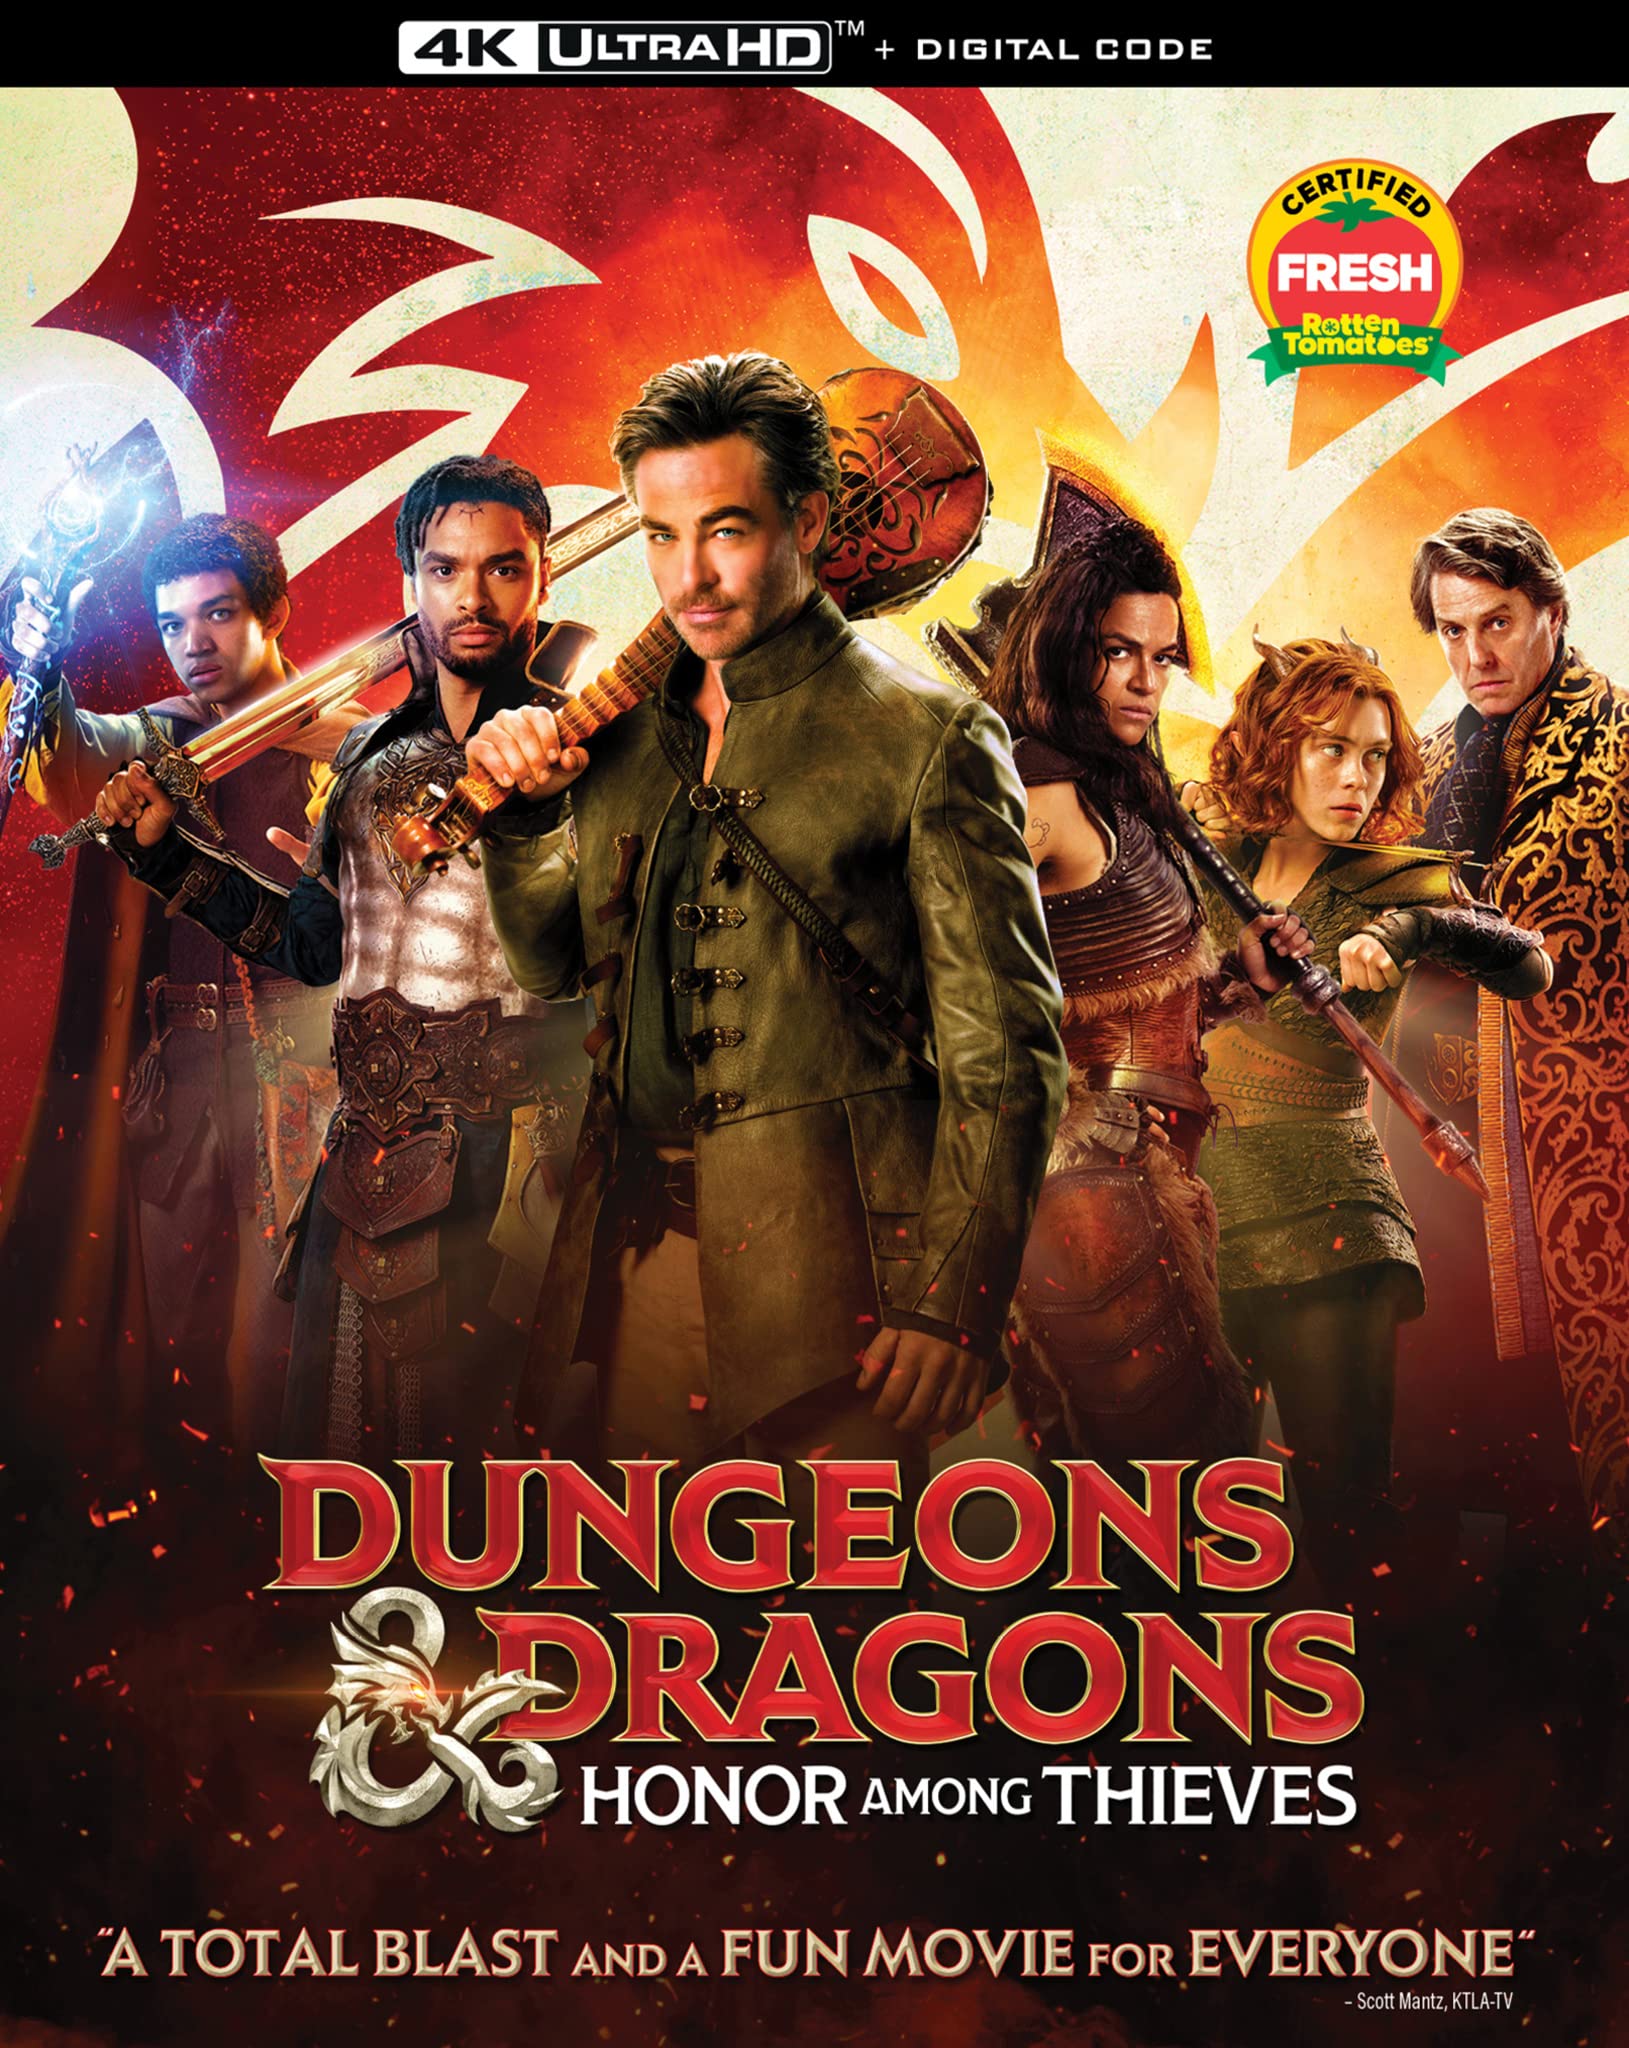 Dungeons & Dragons Honor Among Thieves DVD Release Date May 30, 2023